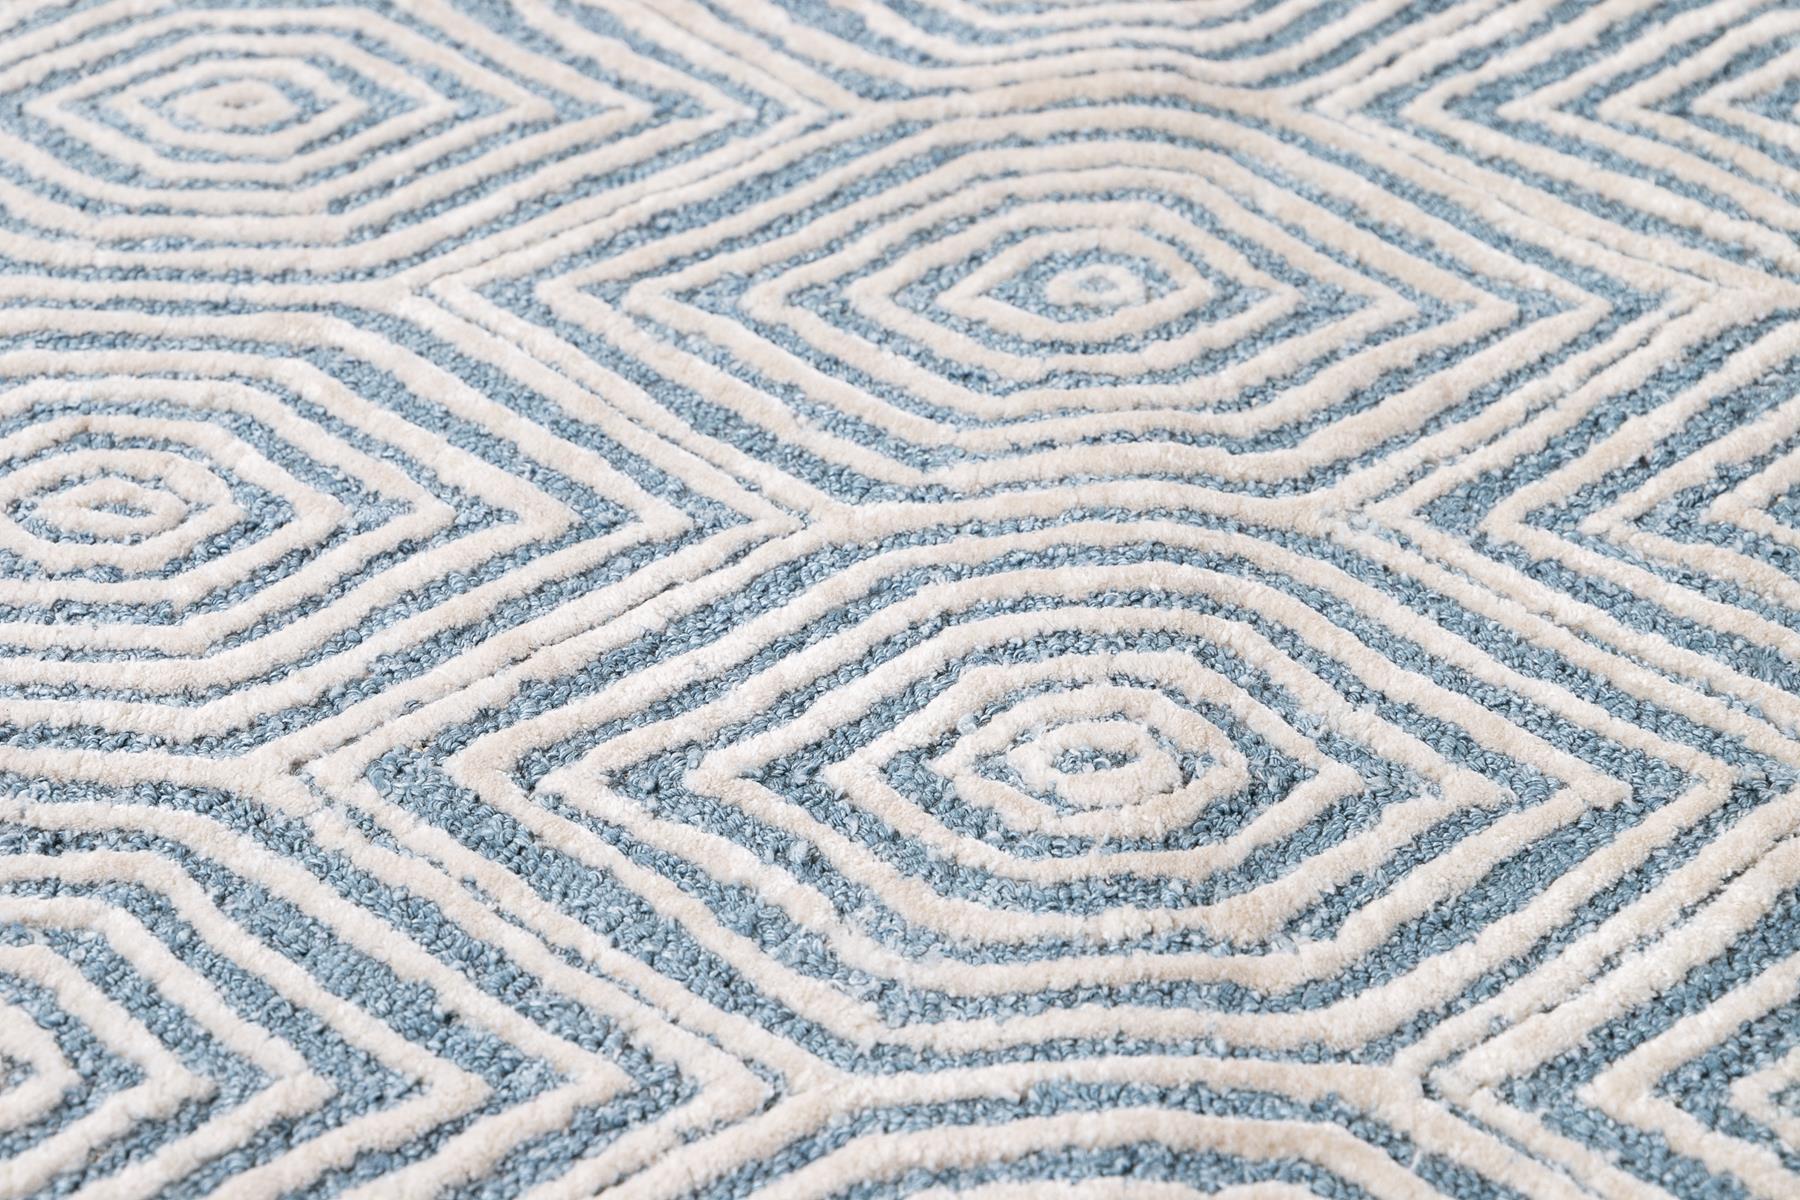 Tufted wool custom rug. Custom sizes and colors made-to-order.

Material: Wool 
Lead time: Approximate 15-20 weeks available 
Colors: As shown (Ivory, Blue), other custom colors and styles available 
Made in Tibet 
Price shown is for an 8' x